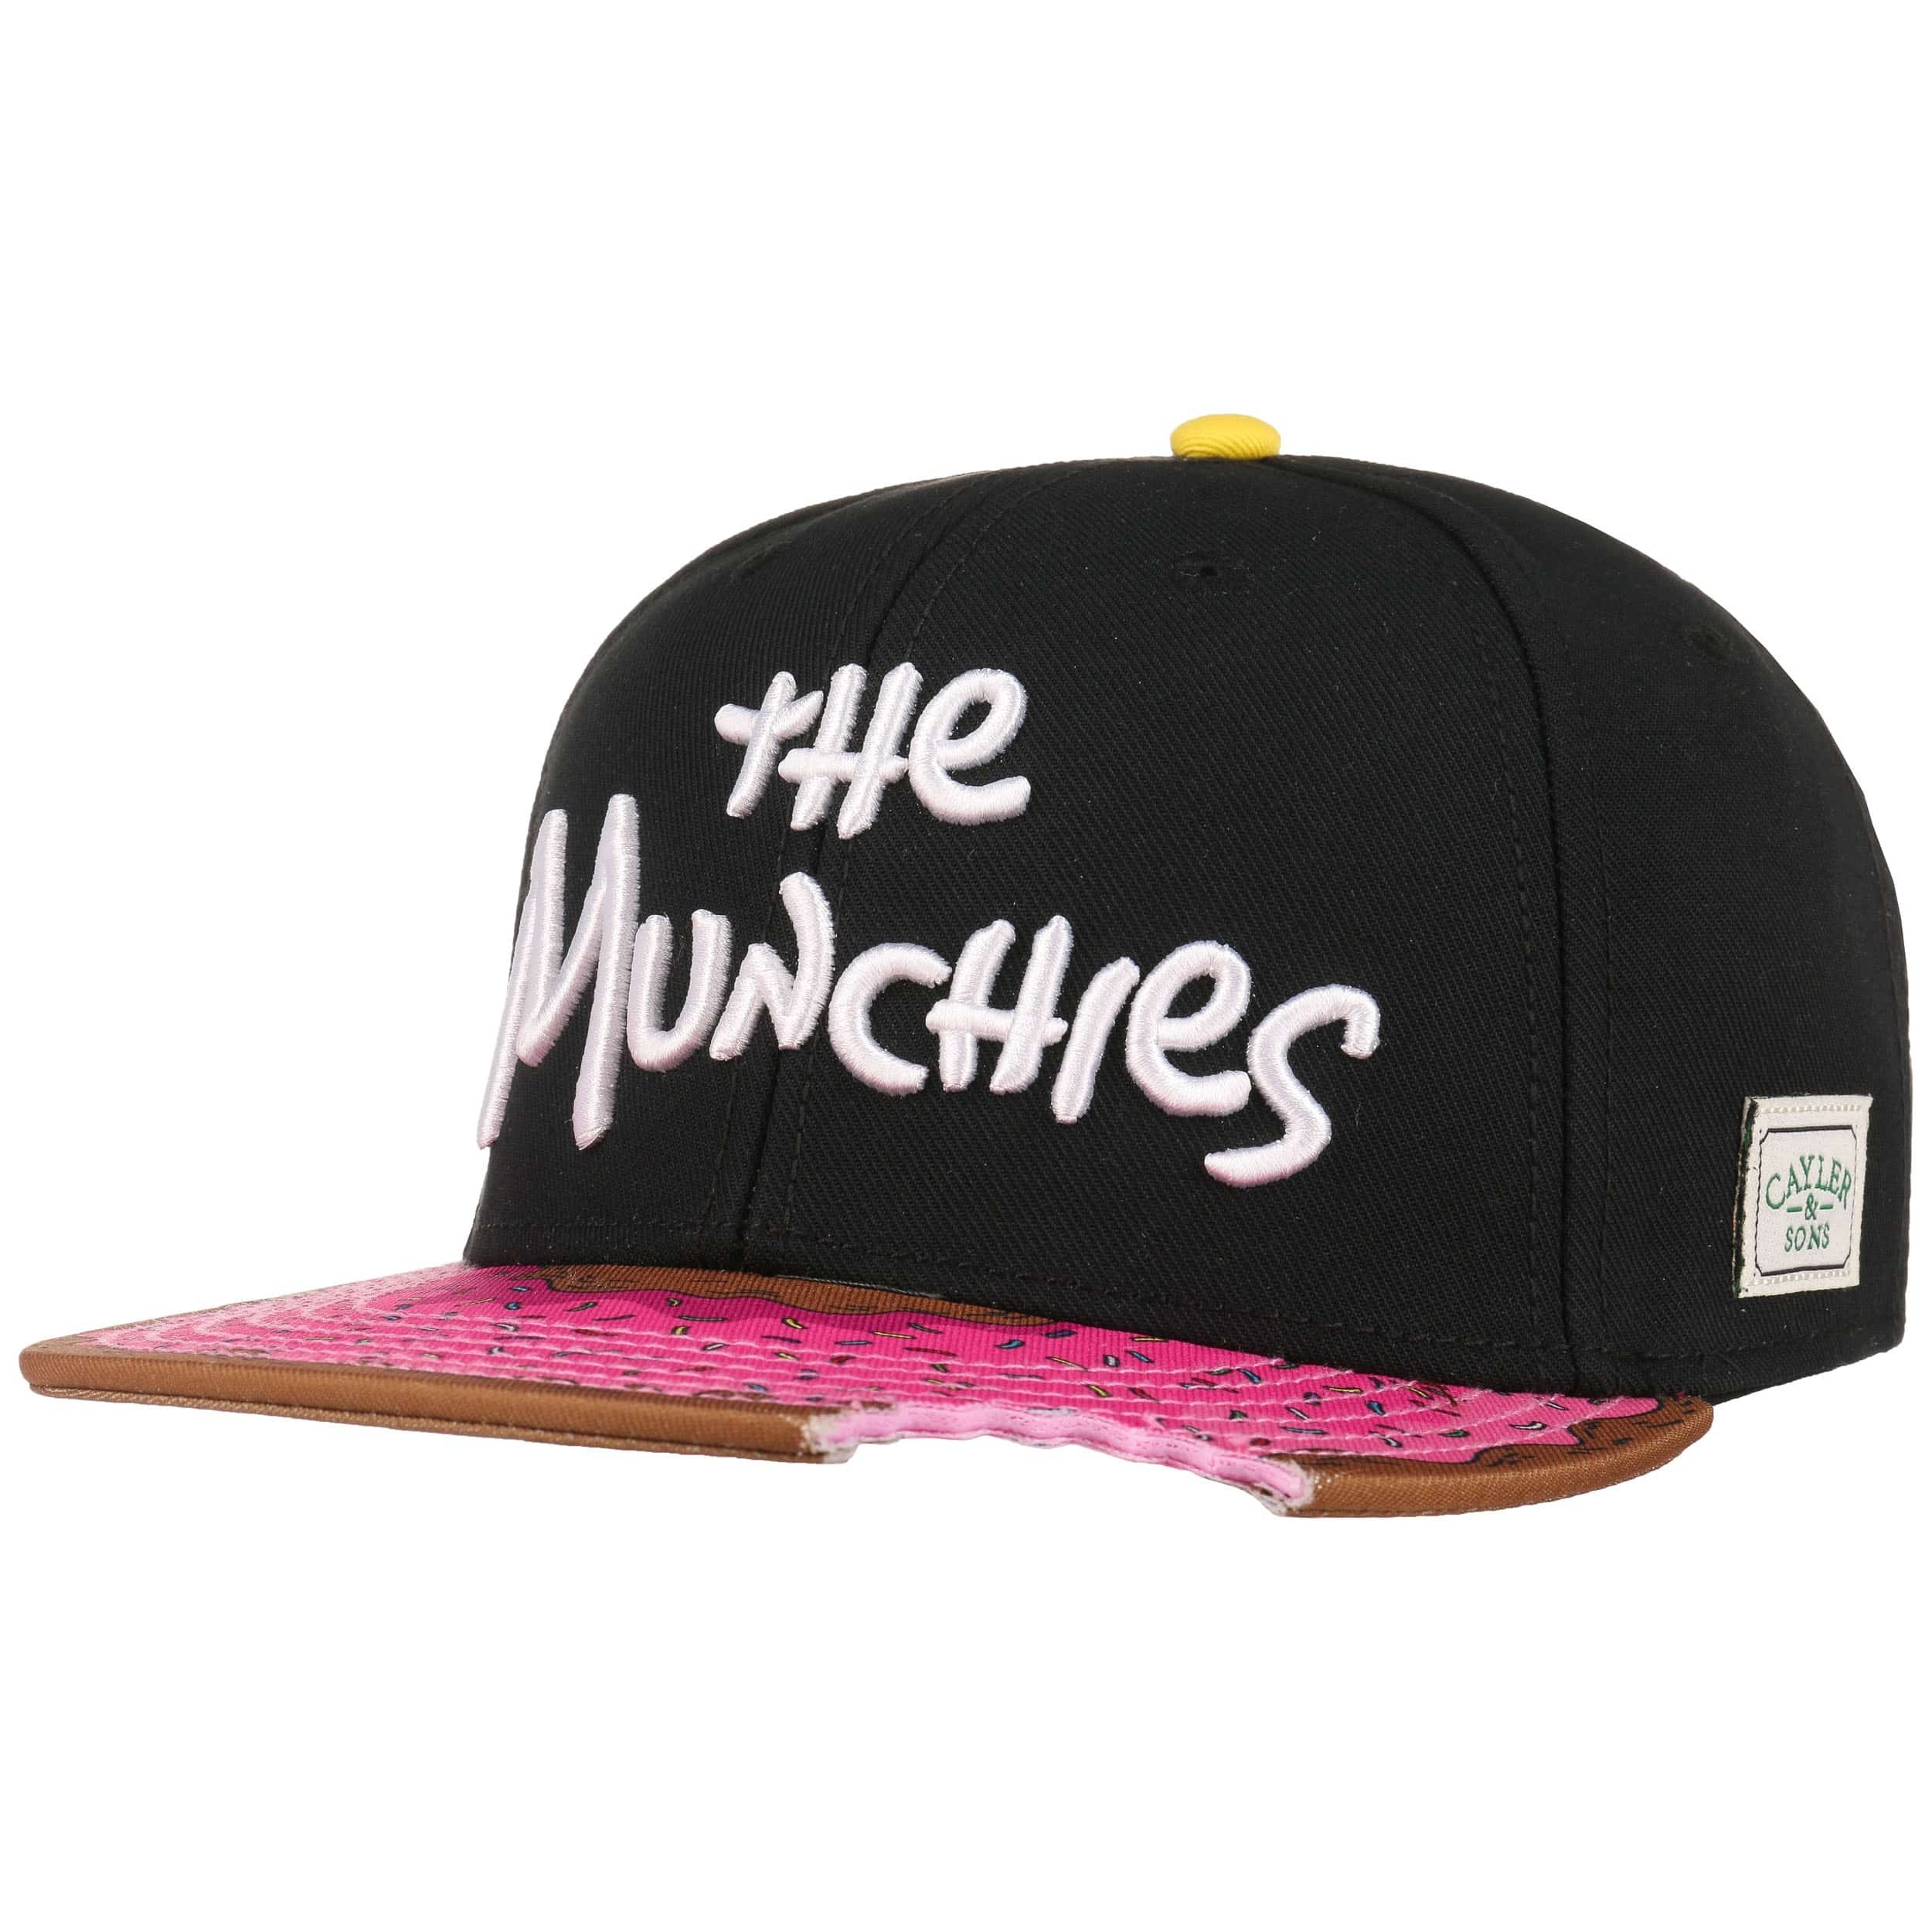 Munchies Classic Cap by Cayler & Sons - 26,95